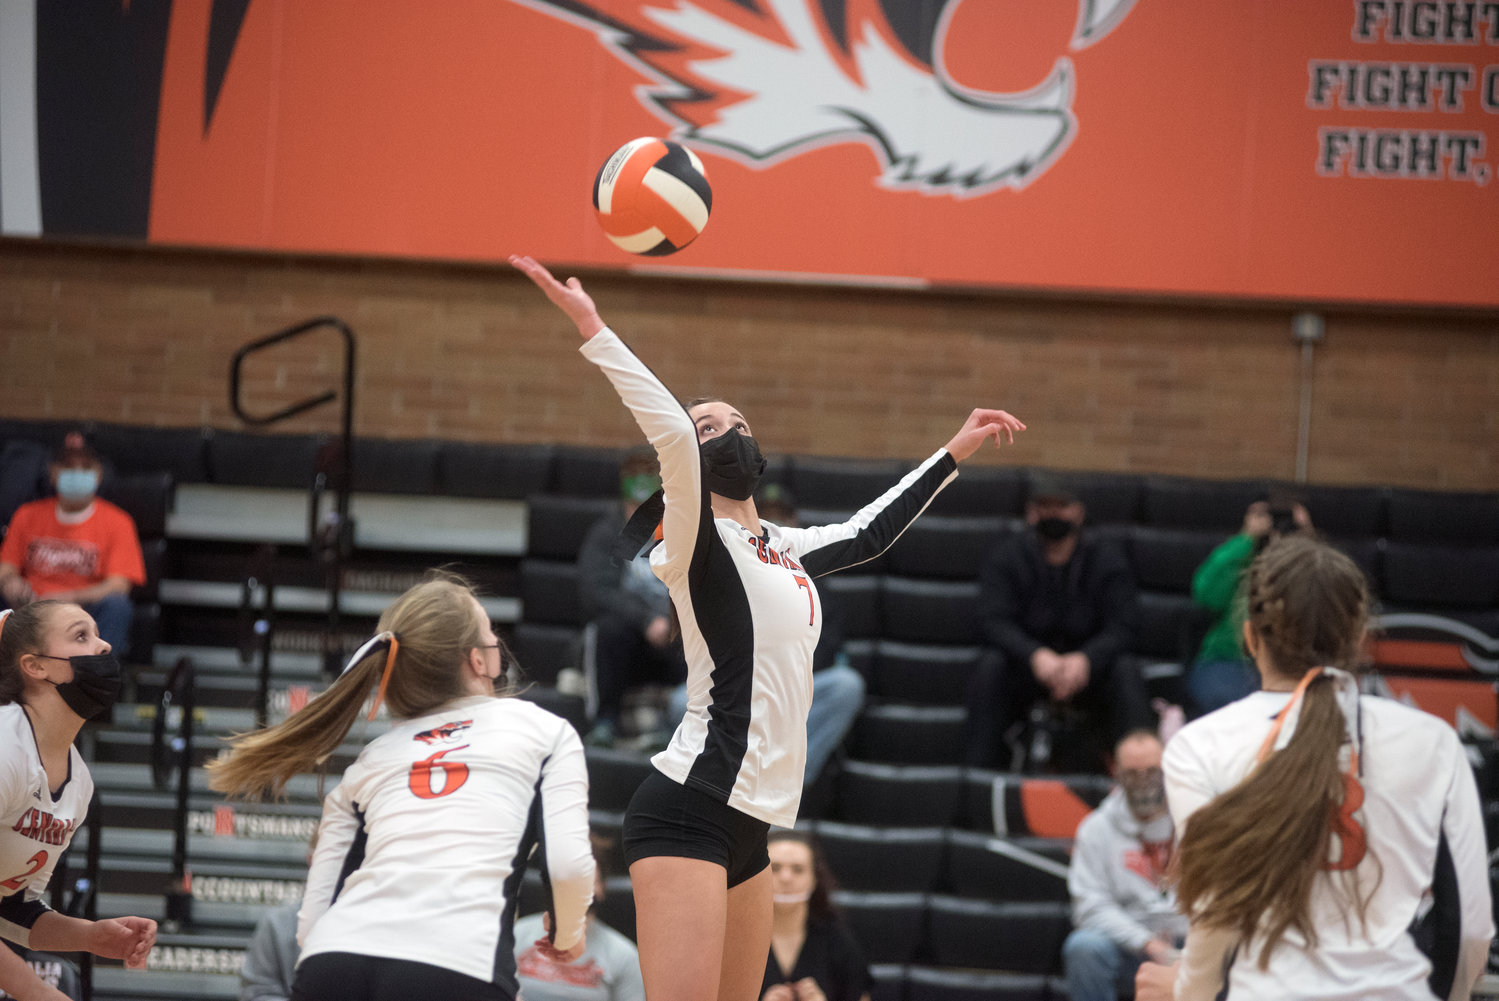 Centralia senior Faith Waterfield rises up to smack the ball against Tumwater in the 2021 season opener Tuesday night in Centralia.